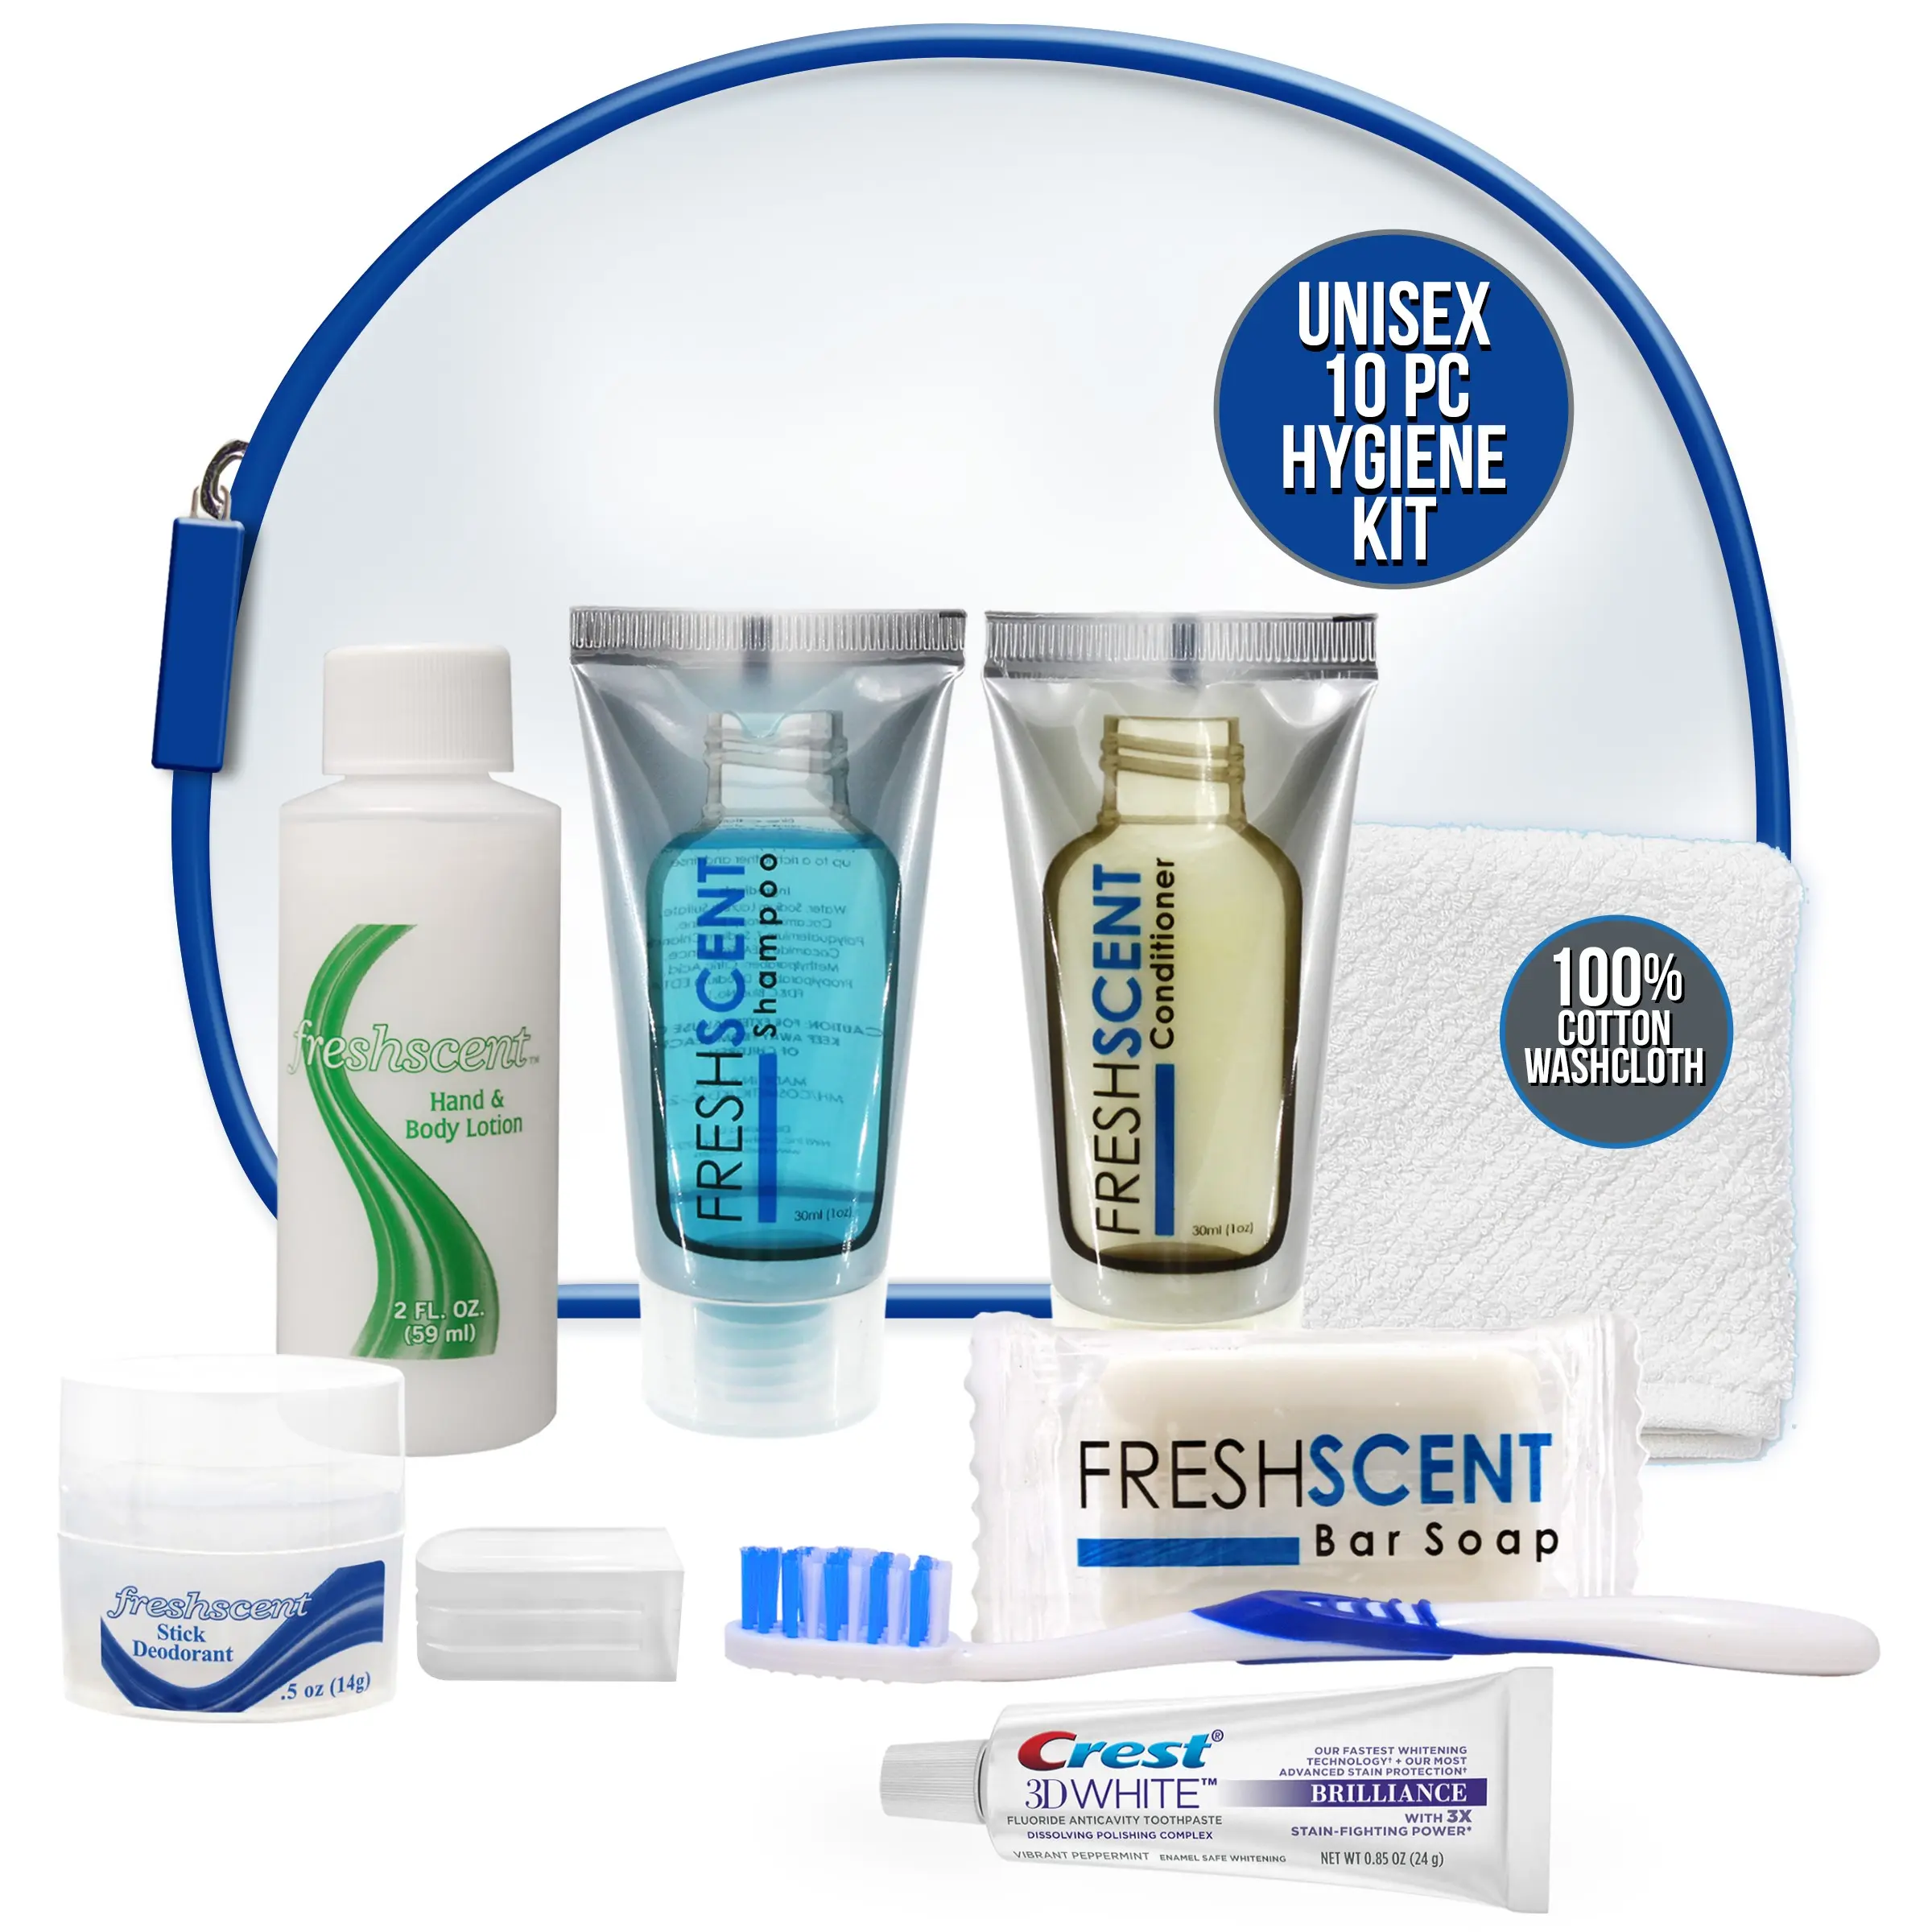 Hygiene Kits: Top 7 Most Common